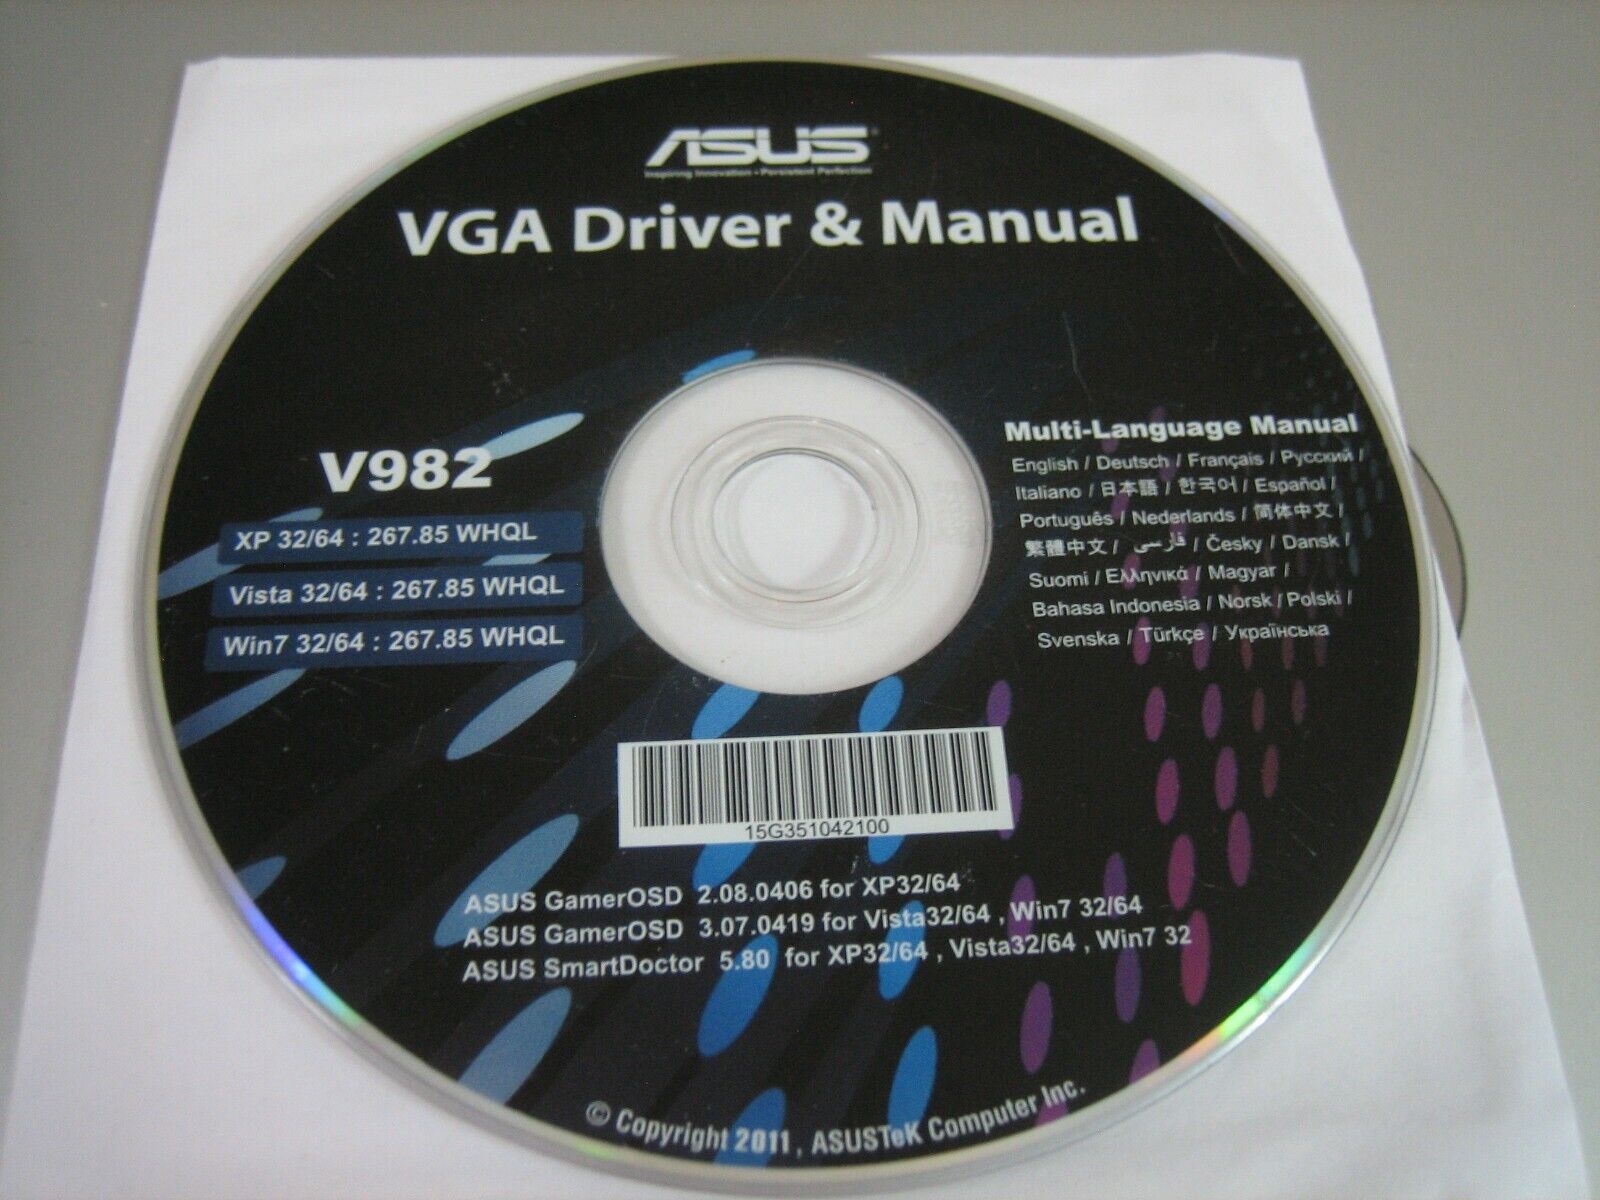 ASUS VGA Driver and Manual V982 SmartDoctor GamerOSD CD (PC, 2011) - Disc Only